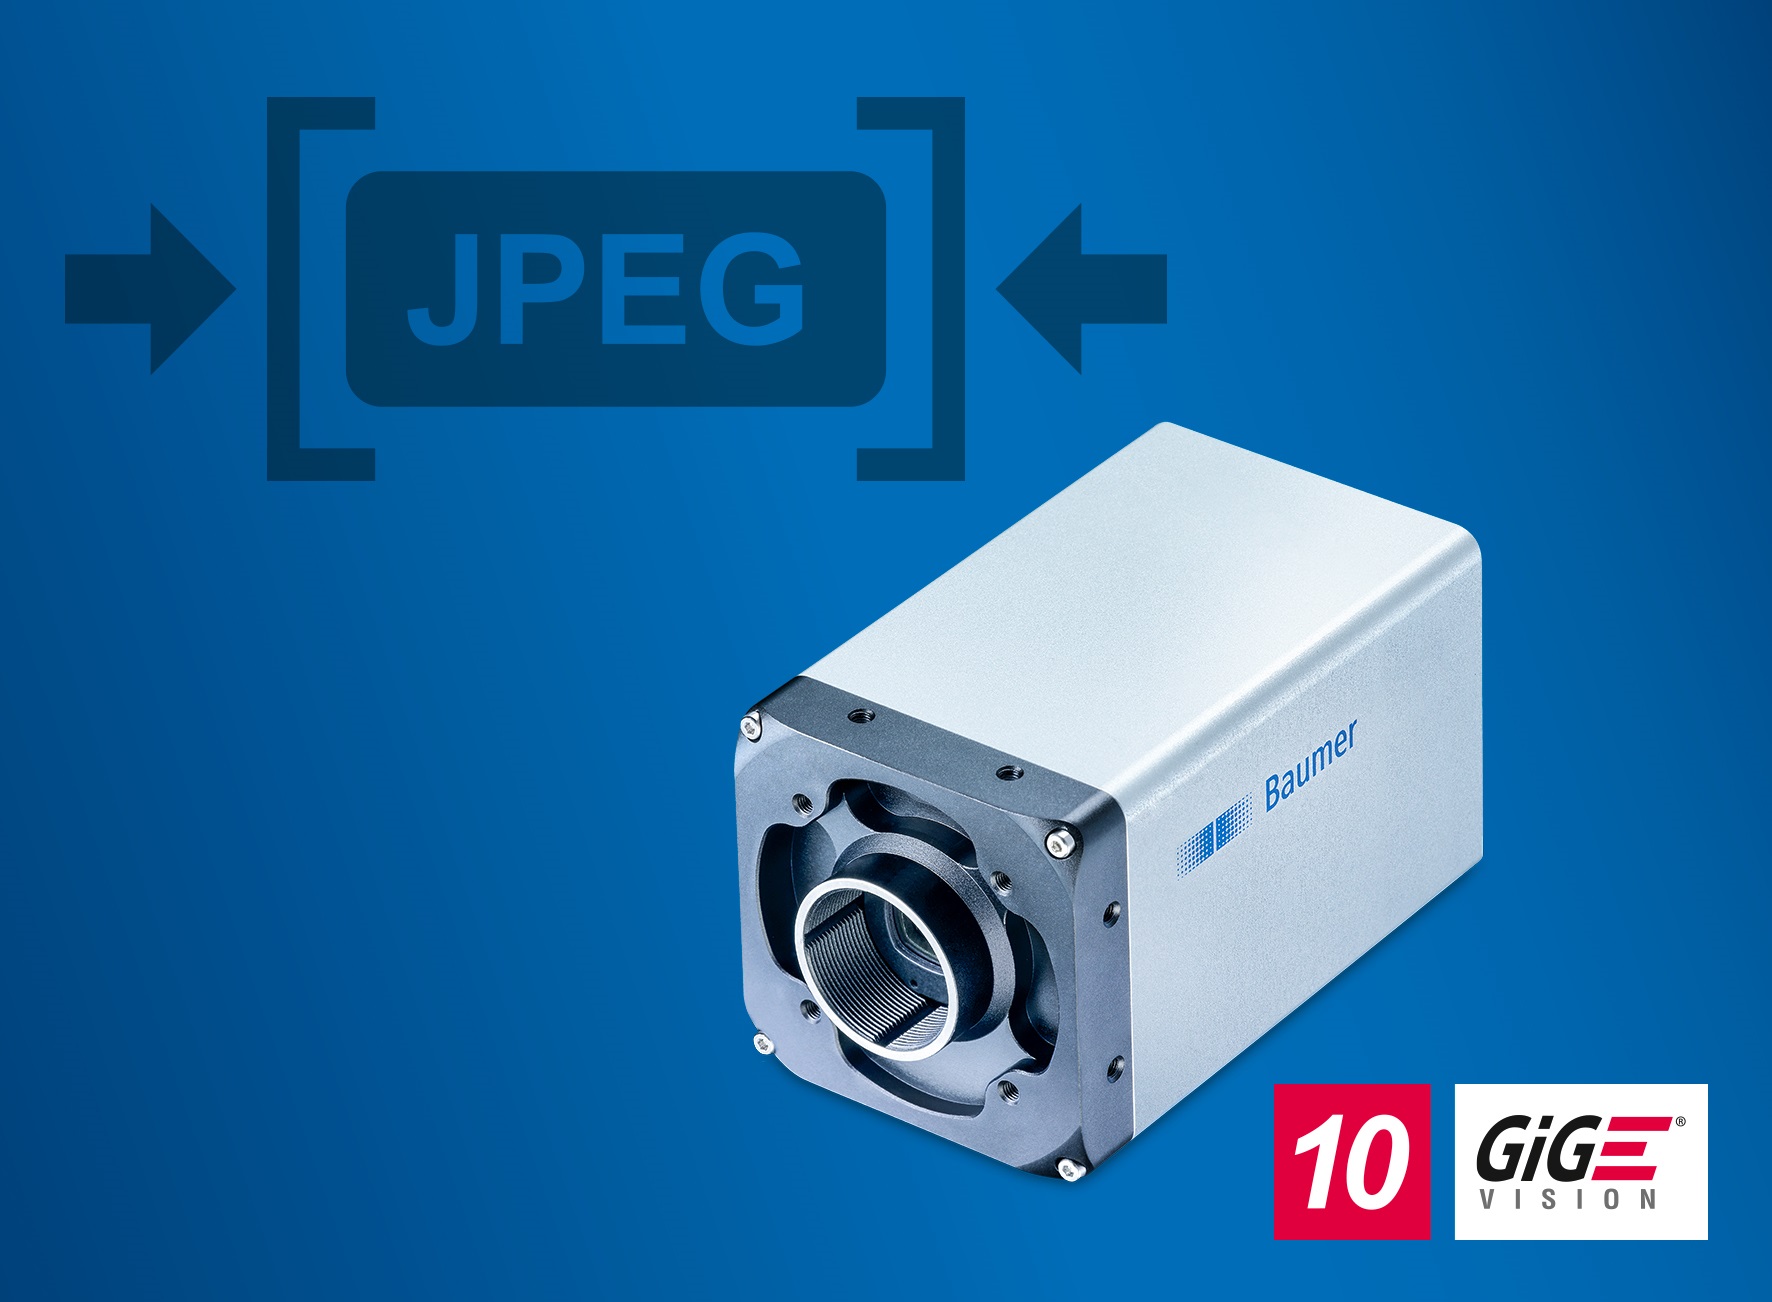 The high-speed LXT cameras with integrated JPEG image compression save bandwidth, CPU load, and storage capacity for a simpler and more cost-effective system design.